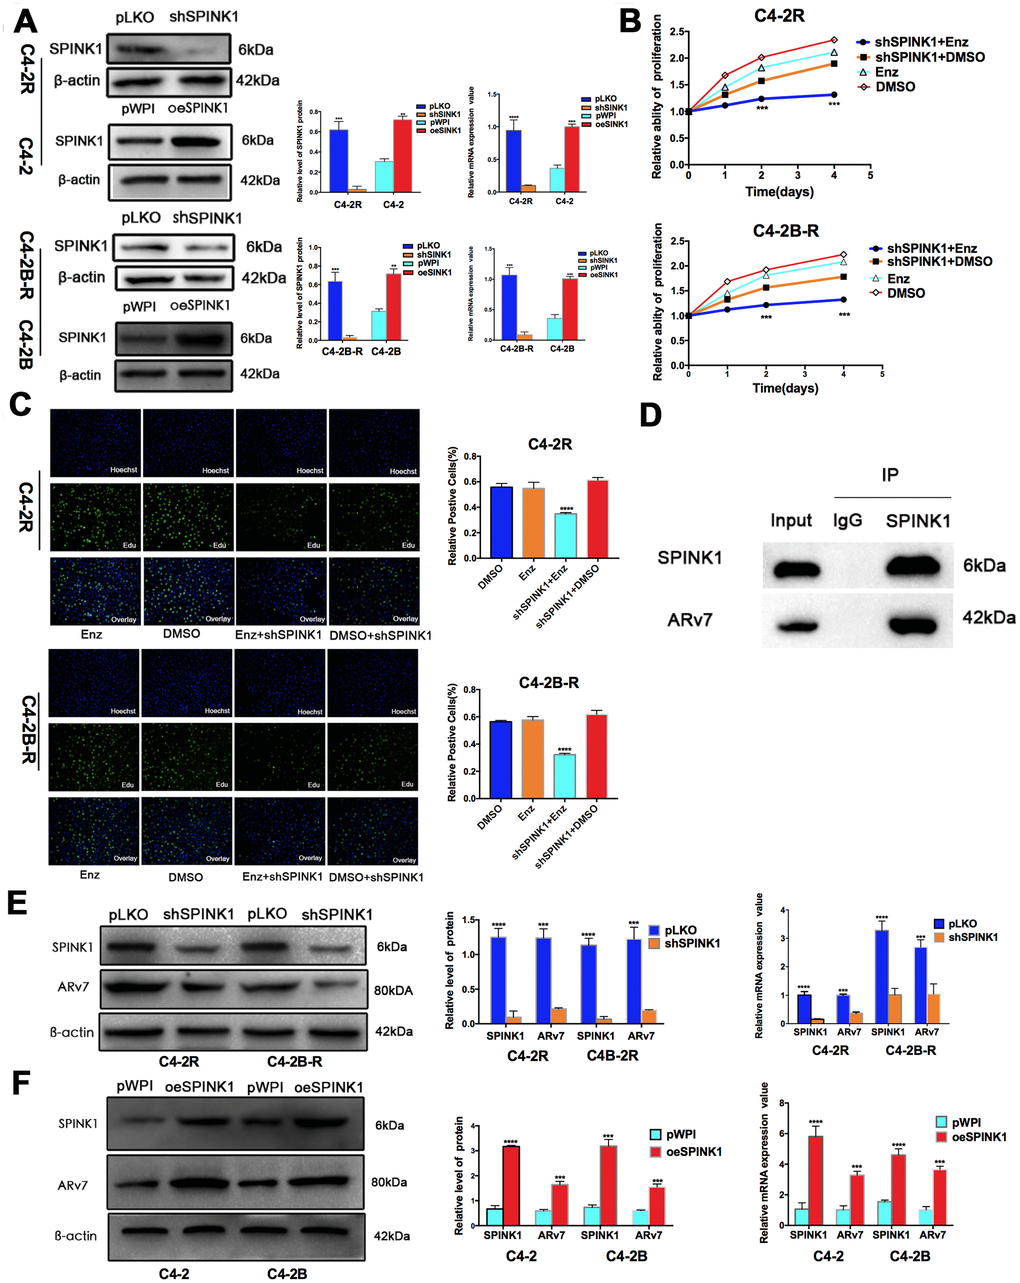 SPINK1 promotes Enz resistance and production of ARv7. (A) Western blots and RT-PCR results validating SPINK1 knockdown in C4-2R and C4-2B-R cells, overexpression in C4-2 and C4-2B cells. (B) Percentage of viable +/shSPINK1 C4-2R and C4-2B-R cells with/without Enz treatment. (C) Edu incorporation rate in +/shSPINK1 C4-2R and C4-2B-R cells with/without Enz treatment. (D) Immunoblot showing co-immunoprecipitation of SPINK1 and ARv7 in the C4-2R cells. (E, F) Western blots and qRT-PCR results showing AR-v7 protein and mRNA levels in oeSPINK1 C4-2 and C4-2B cells, and shSPINK1 C4-2R and C4-2B-R cells.